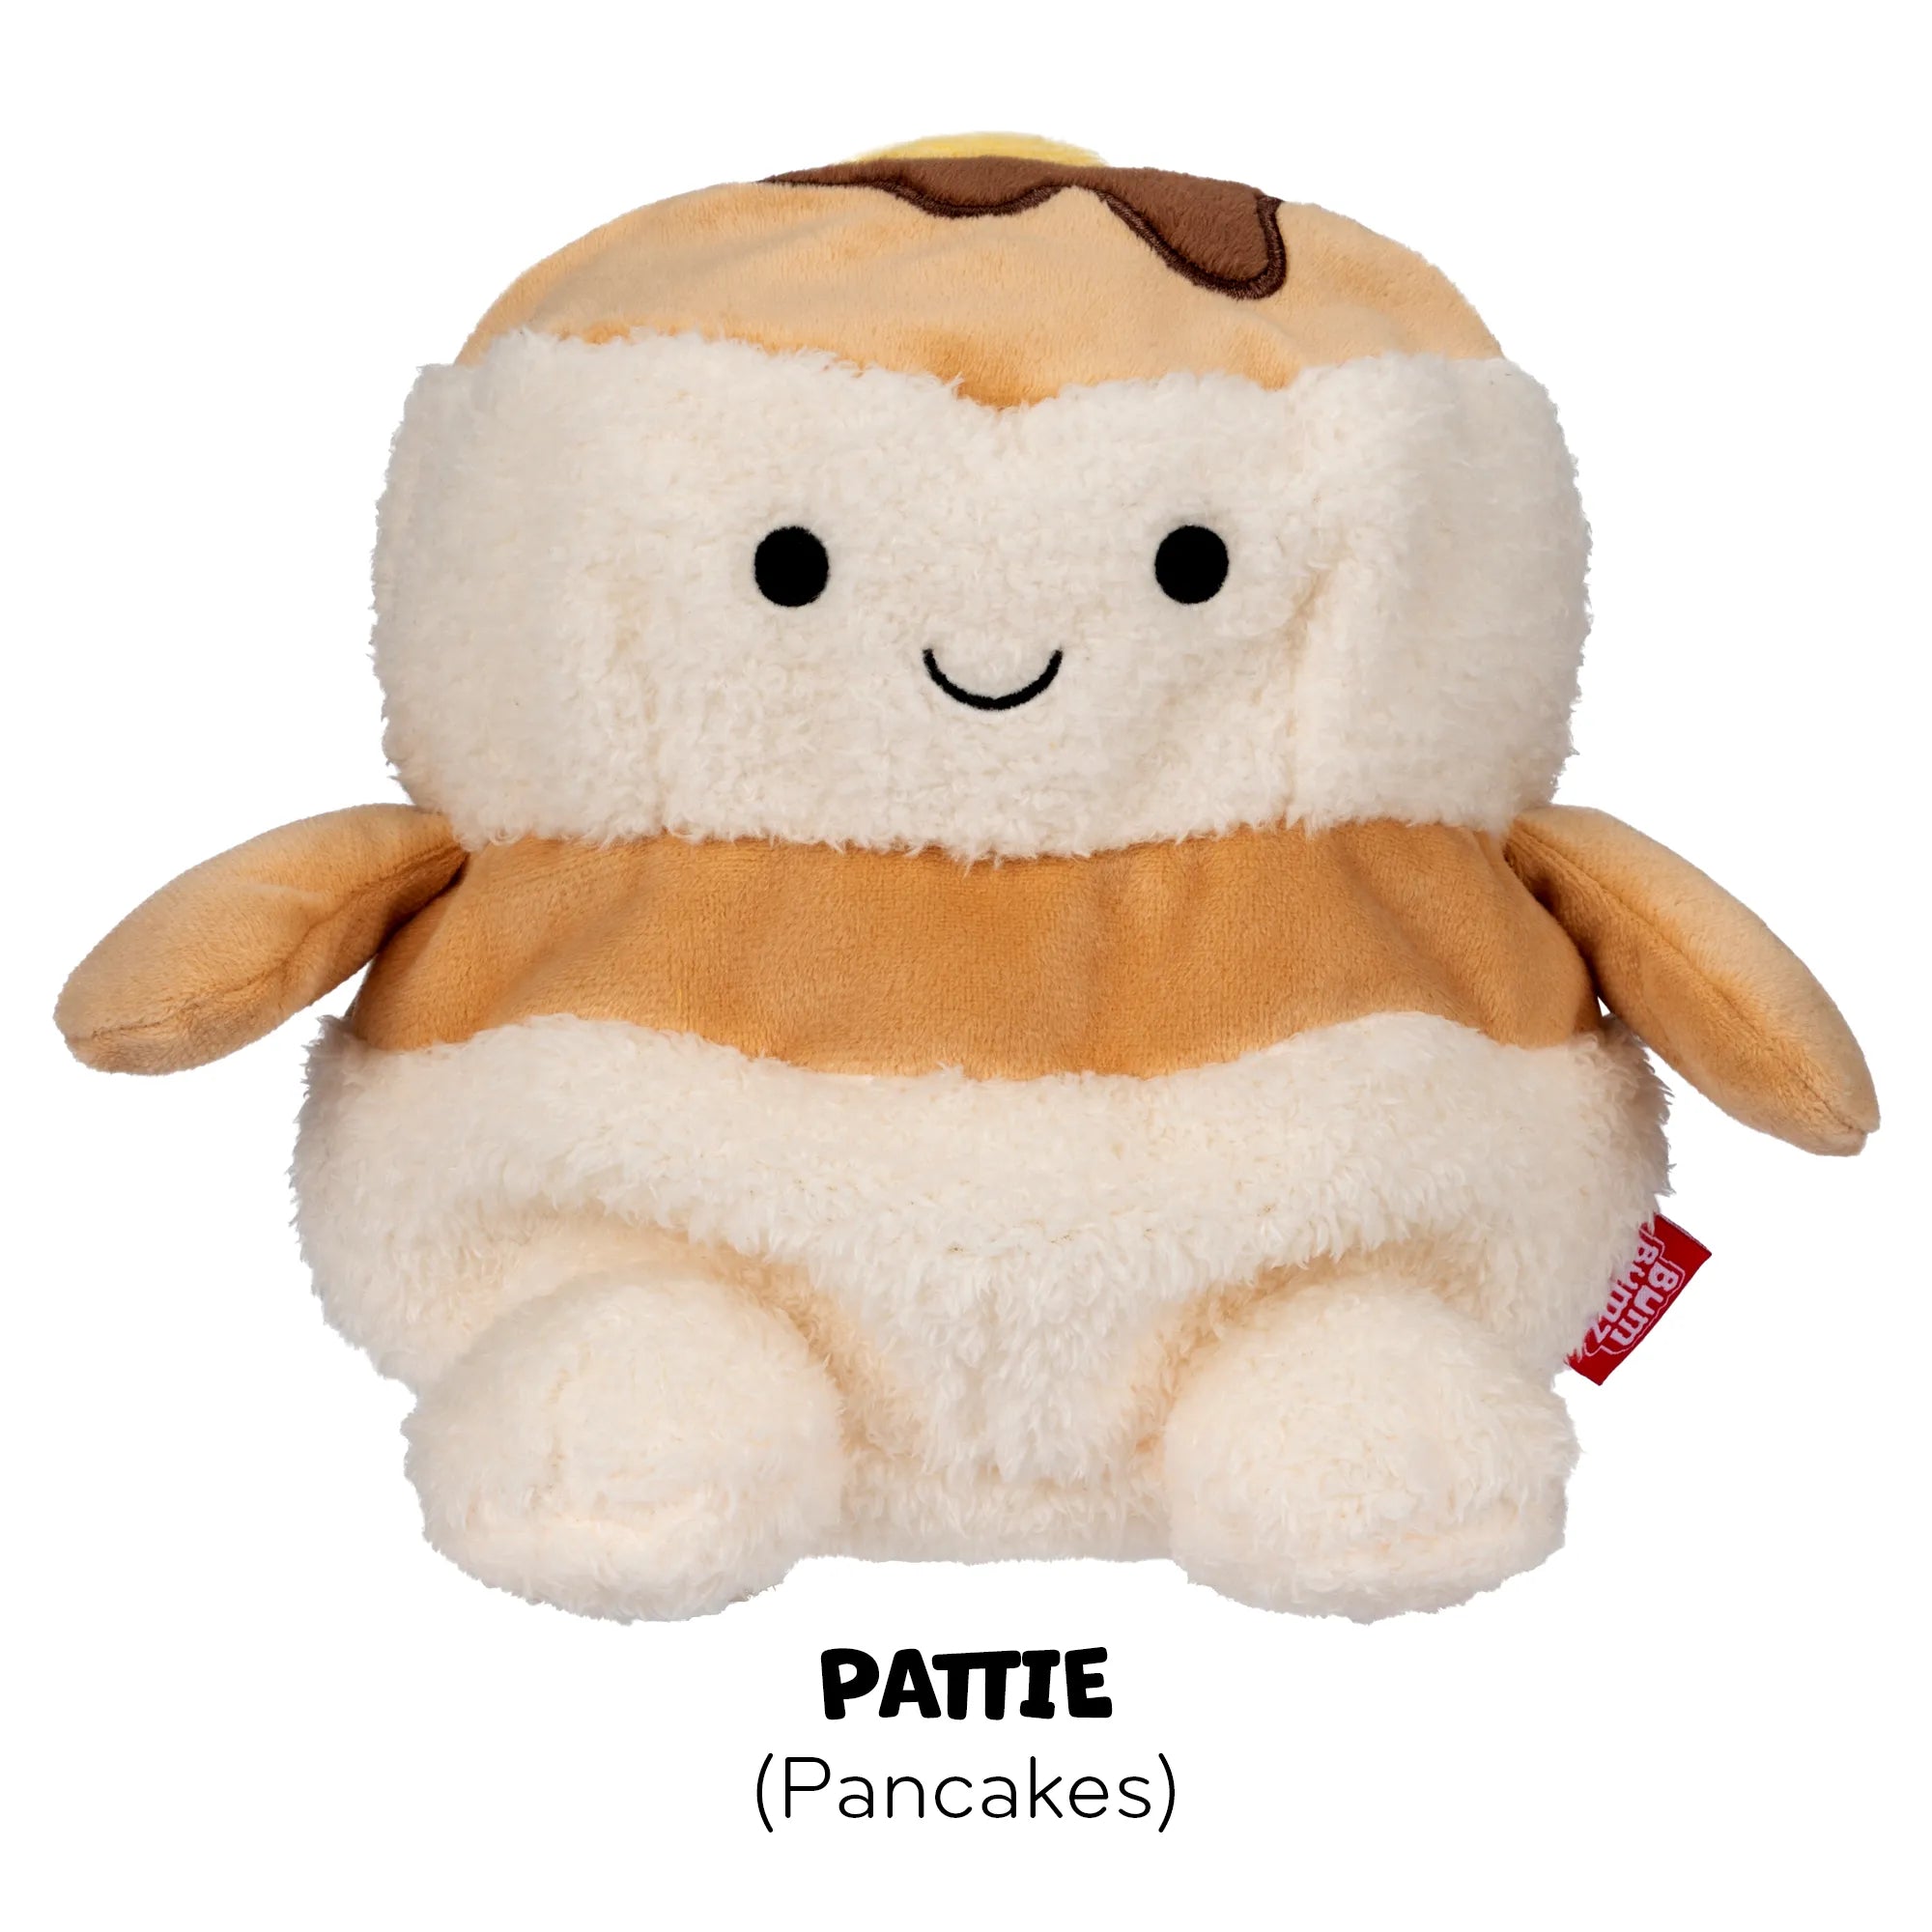 BumBumz Breakfast Series - 7.5” Collectibles - Pancakes 'Pattie' - Ages 3-Adult - Brown's Hobby & Game